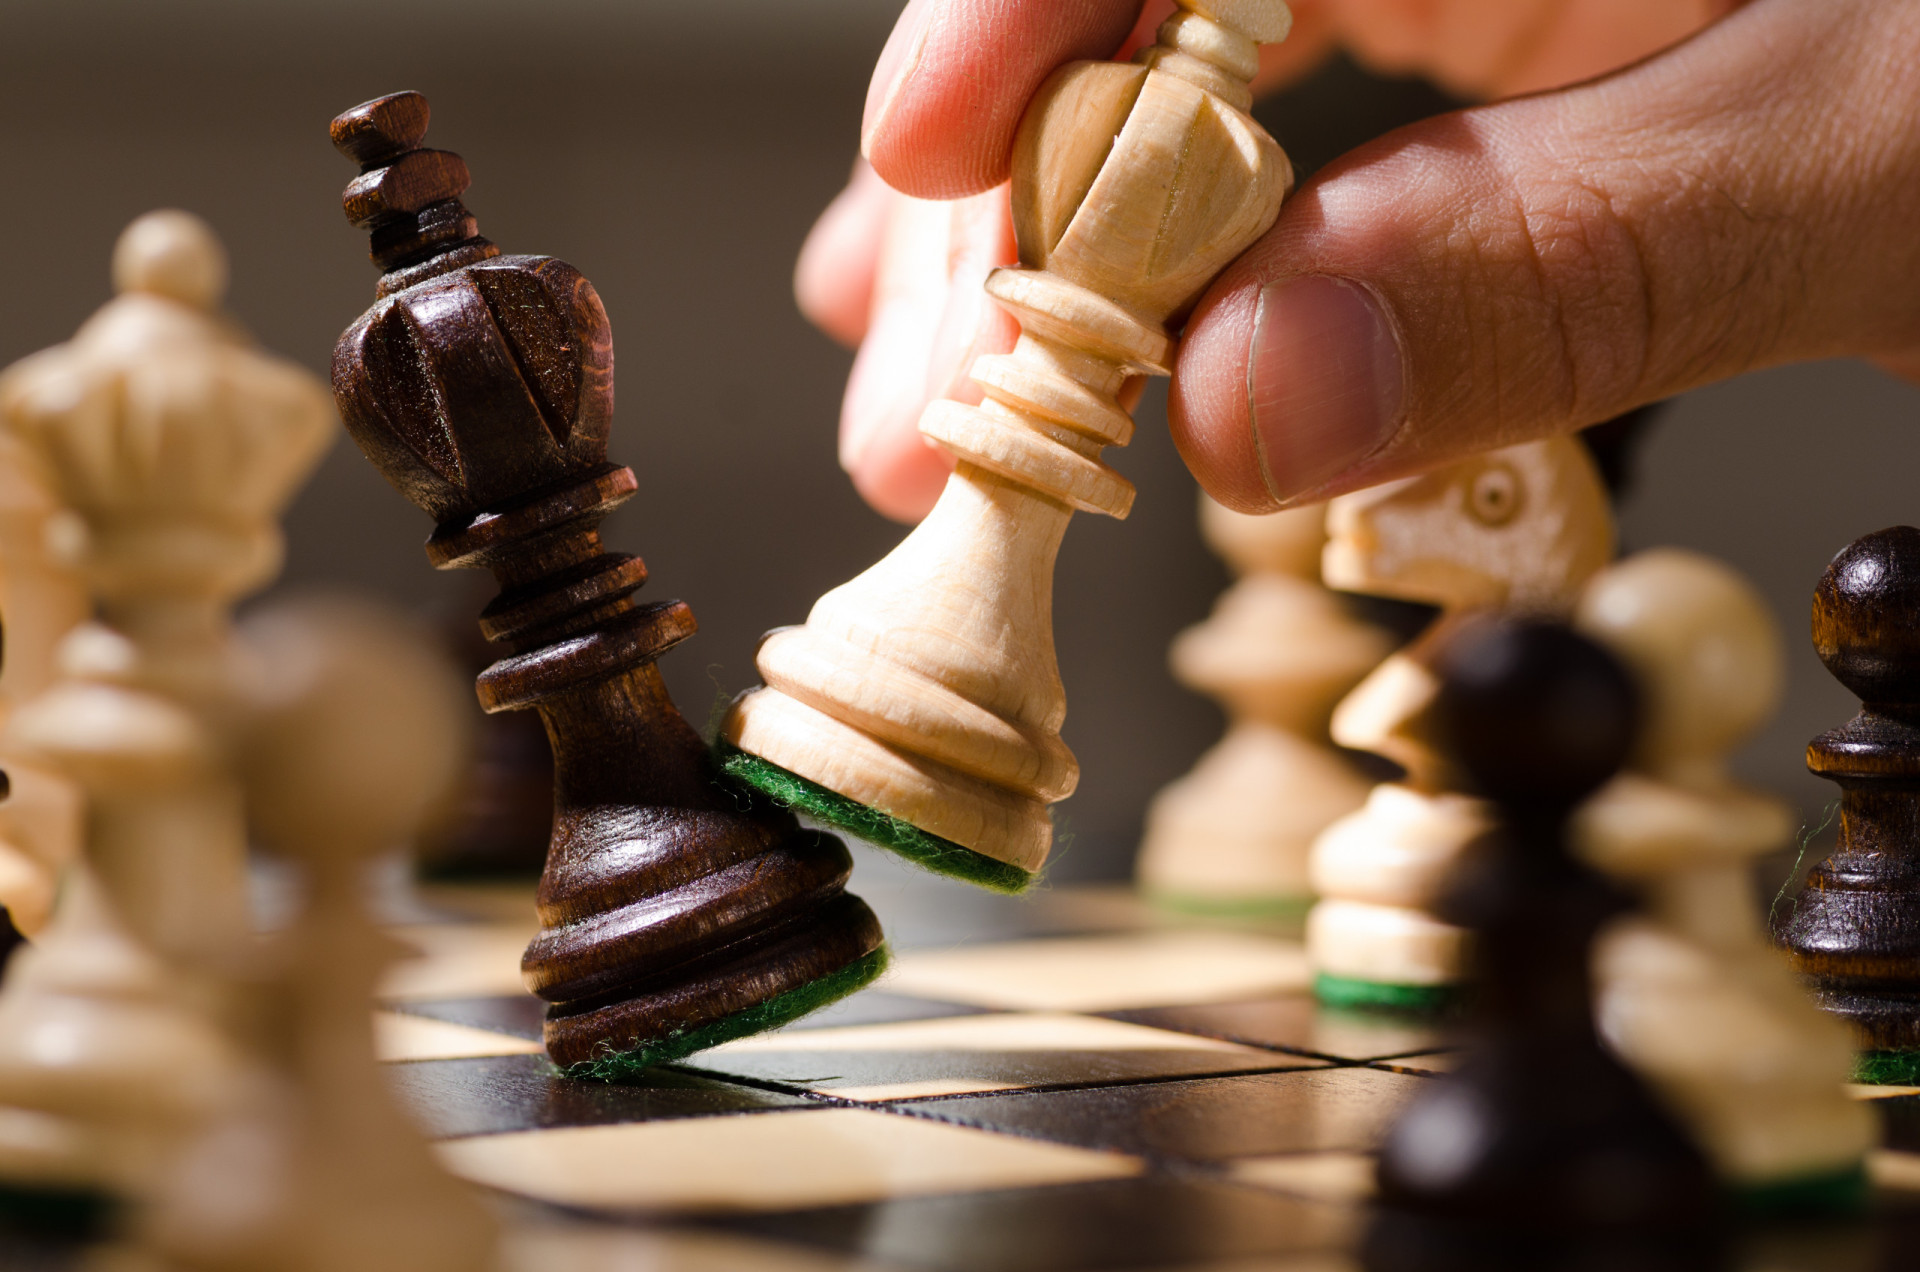 <p><span>To hone your problem-solving skills, try to approach problems in a focused way, but with an open mind. You might like to practice problem solving games, such as chess, too.</span></p><p><span>Sources: (<a href="https://www.wikihow.com/Improve-Soft-Skills" rel="noopener">WikiHow</a>)</span></p><p><span>See also: <a href="https://www.starsinsider.com/lifestyle/482676/top-tips-for-diffusing-workplace-tension">Top tips for diffusing workplace tension</a></span></p><p>You may also like:<a href="https://www.starsinsider.com/n/494870?utm_source=msn.com&utm_medium=display&utm_campaign=referral_description&utm_content=527016en-ca"> The extravagant spending of royals around the world</a></p>